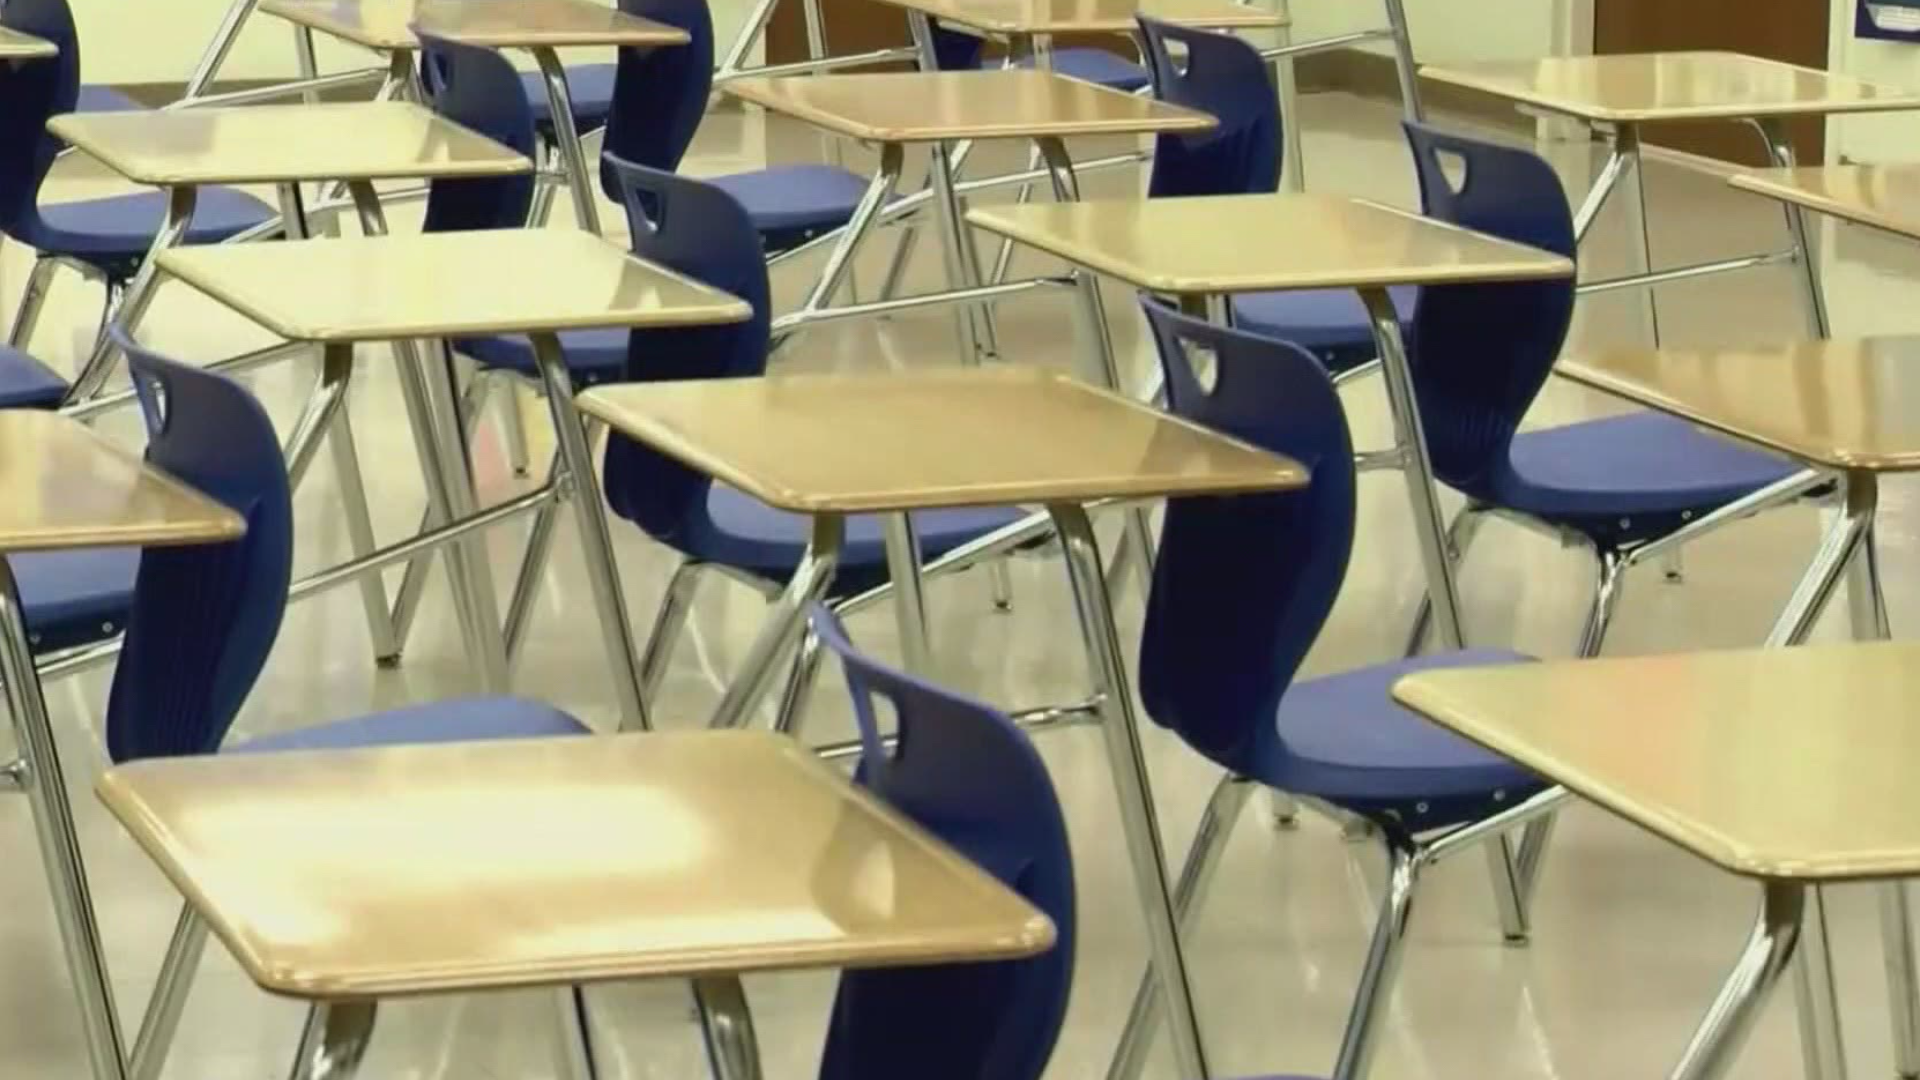 The CDC is looking at a new study that would shift its guidelines on physical distancing in schools.